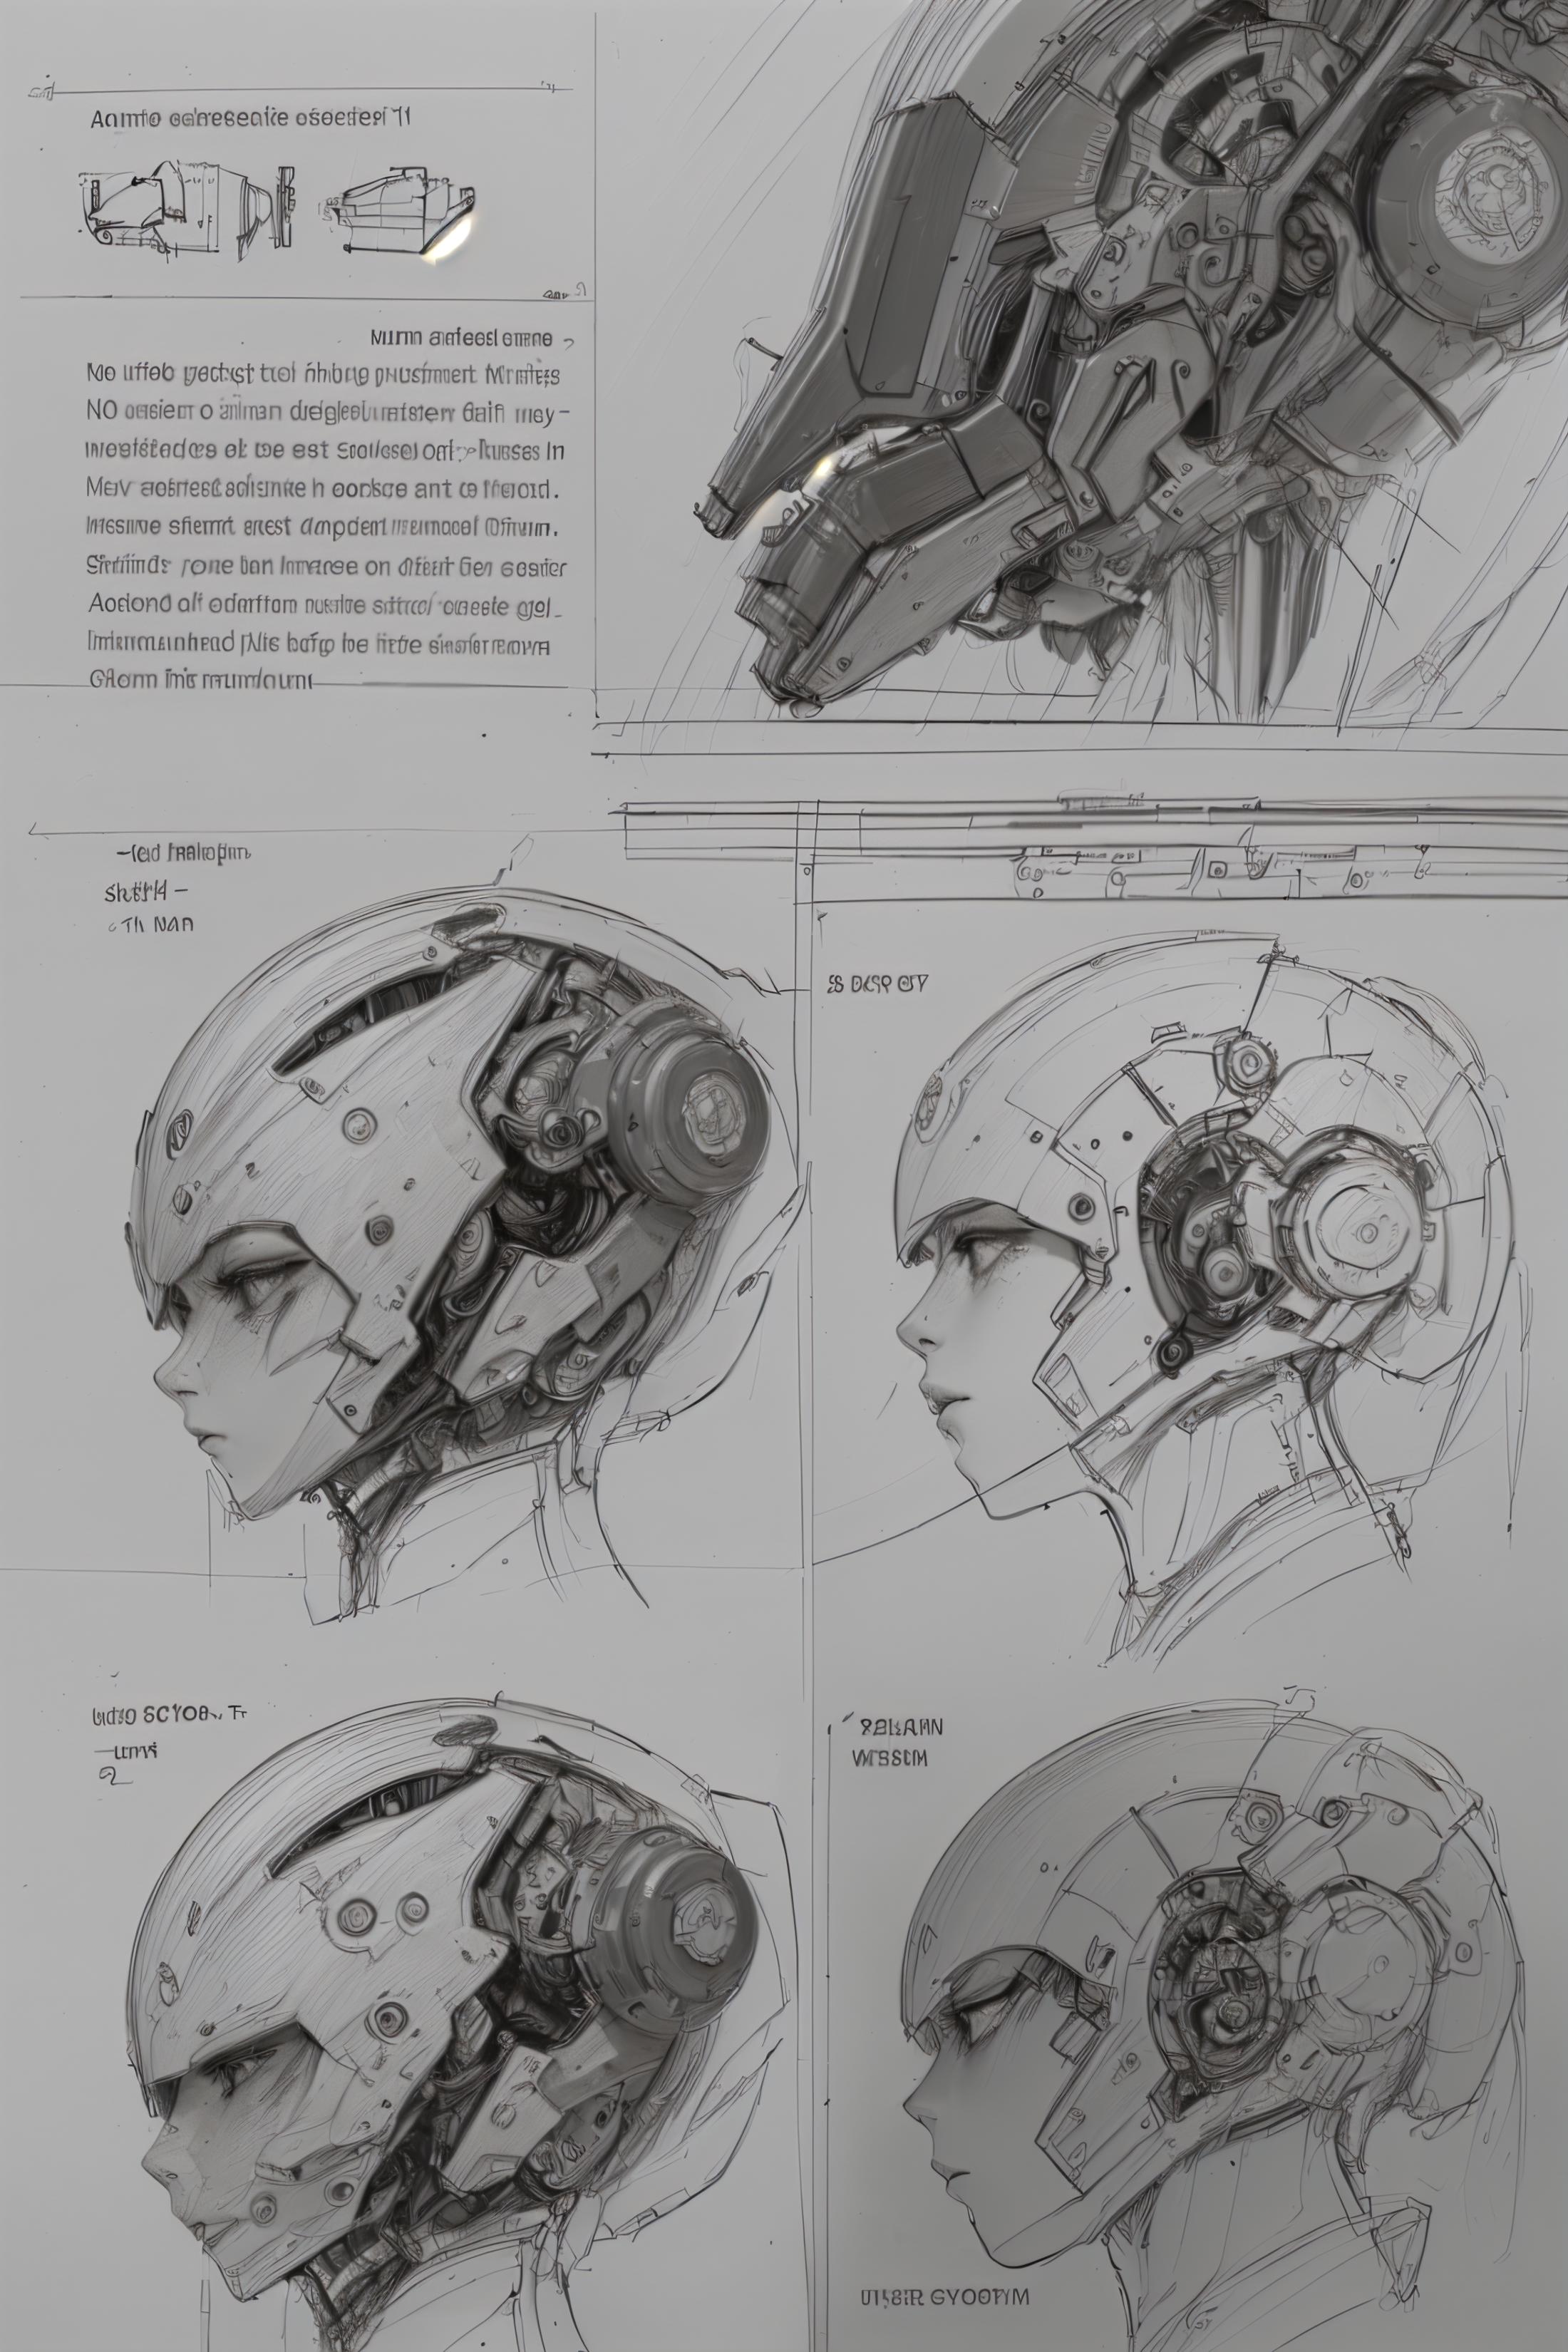 A Step-by-Step Illustration of a Futuristic Machine Head Designed for a Woman